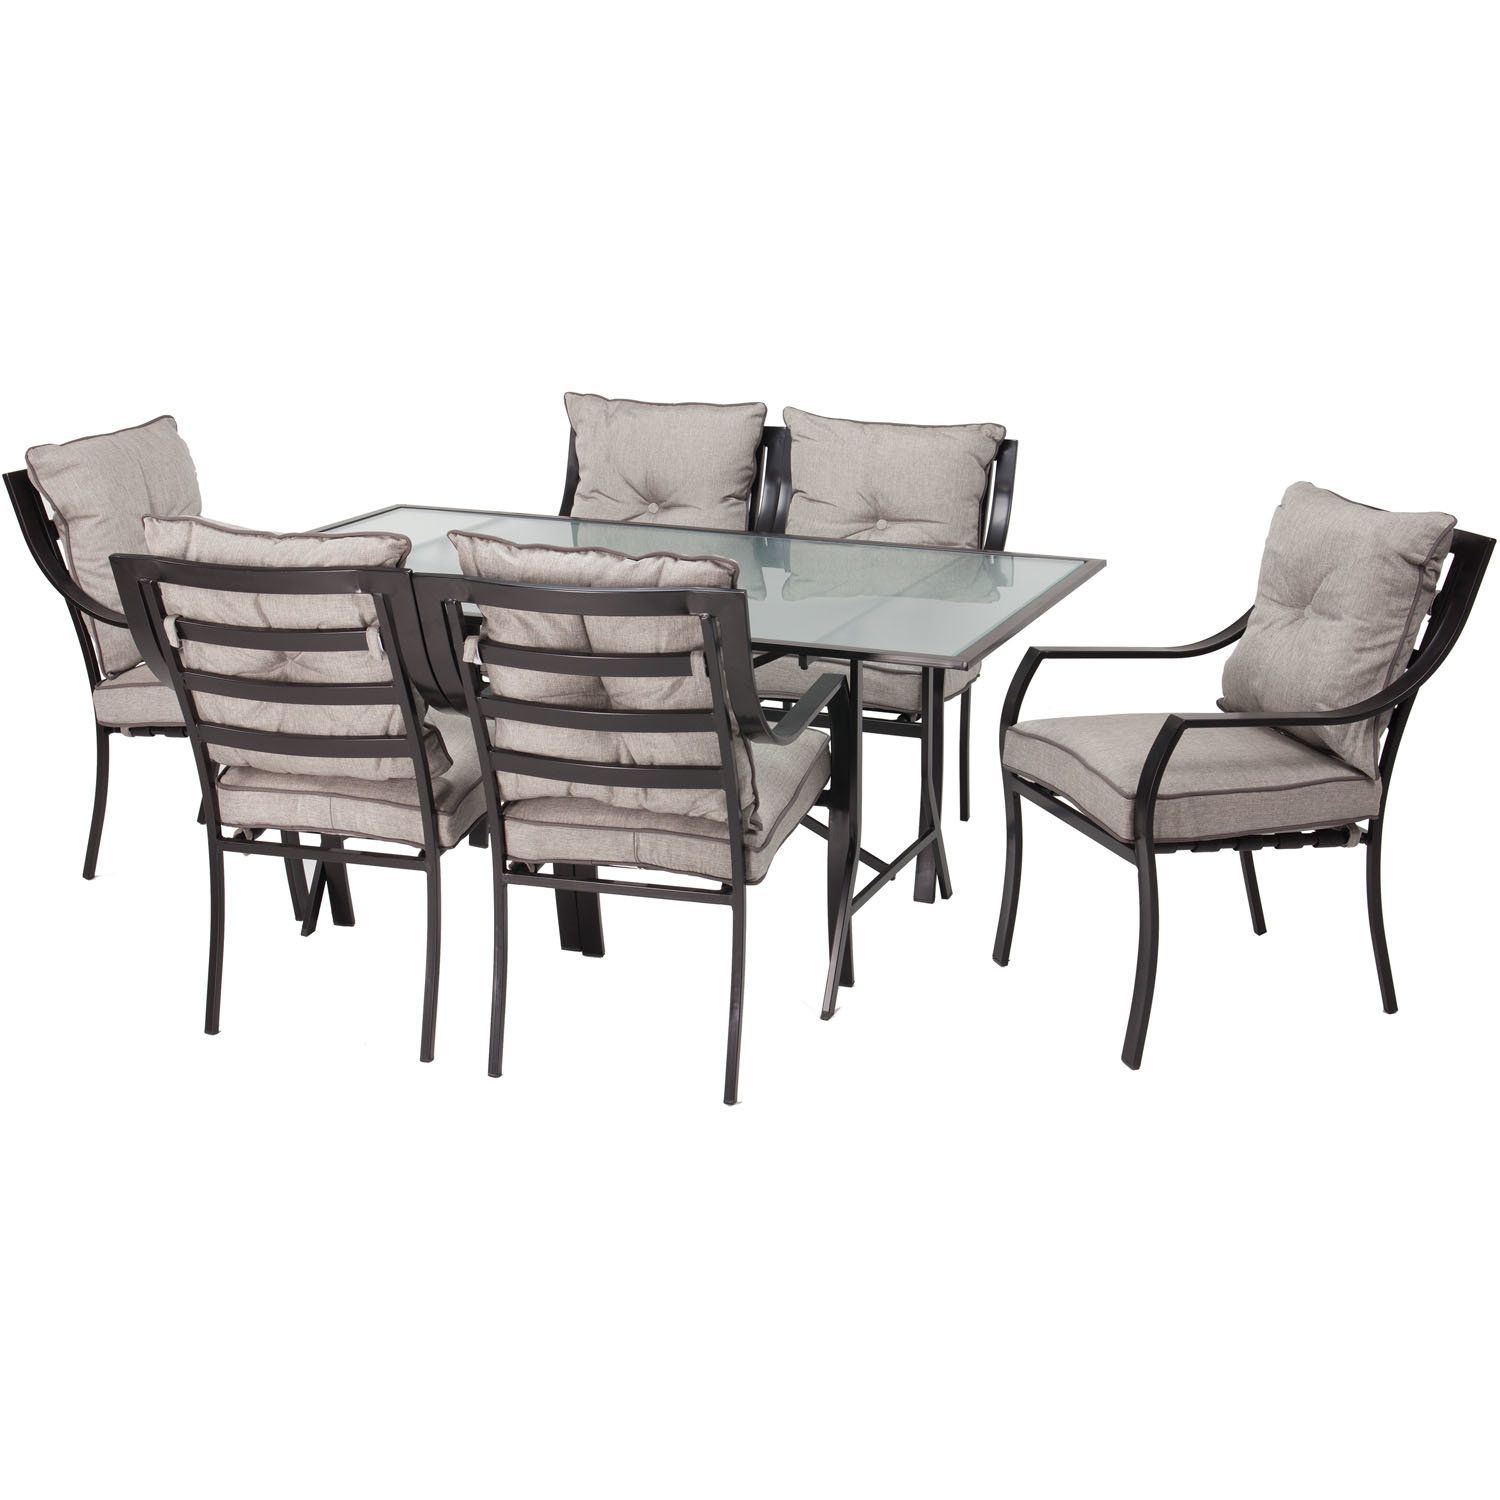 Darby Home Co Bozarth 7 Piece Dining Set With Cushion In Recent Miskell 5 Piece Dining Sets (Photo 16 of 20)